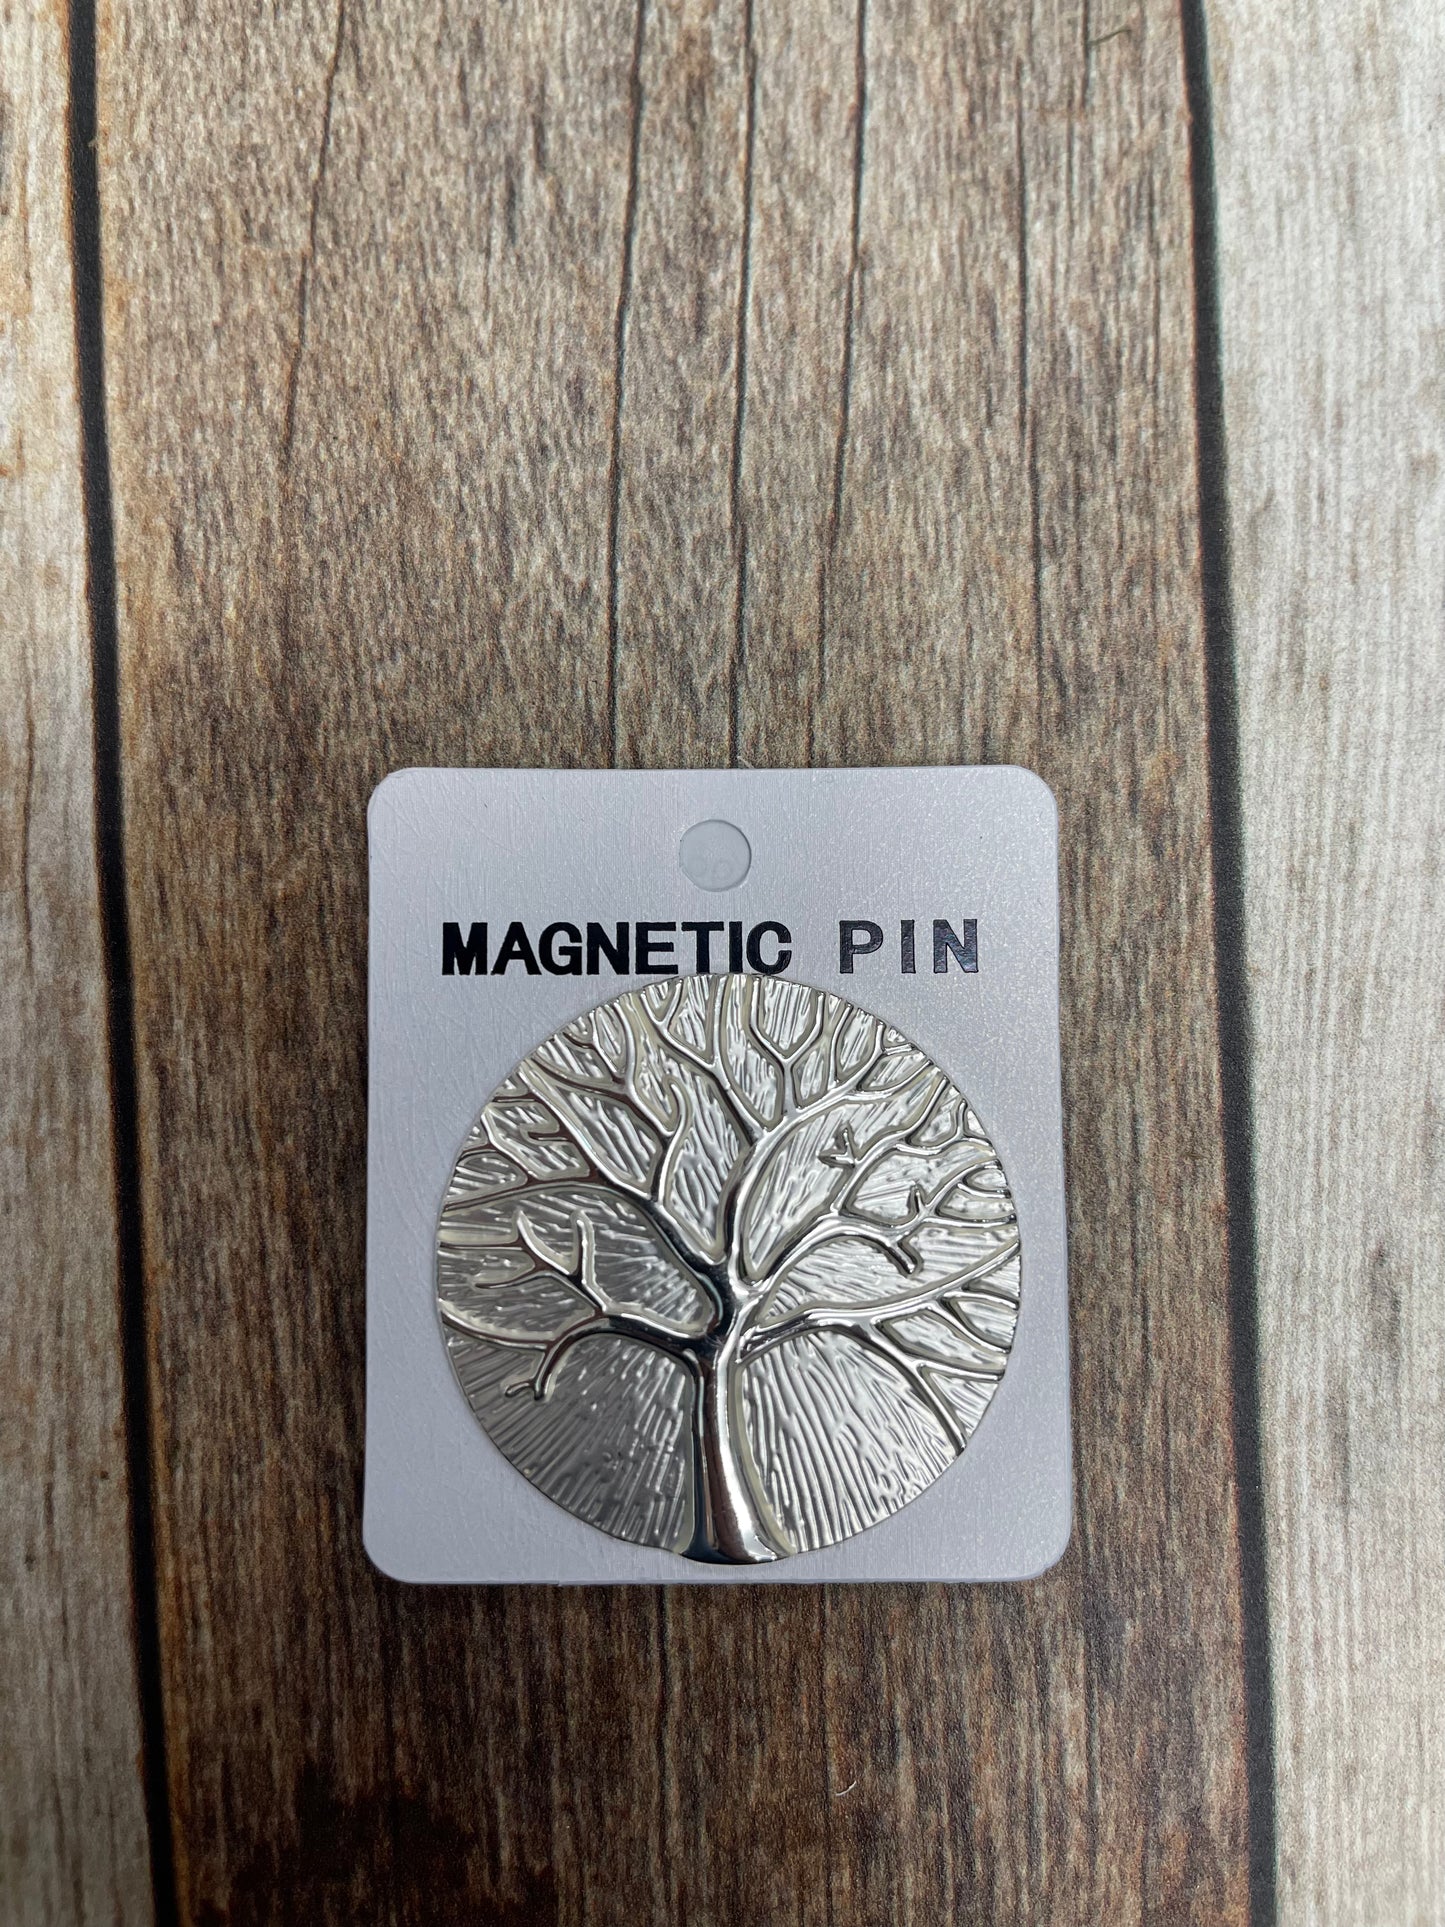 Magnetic Pins